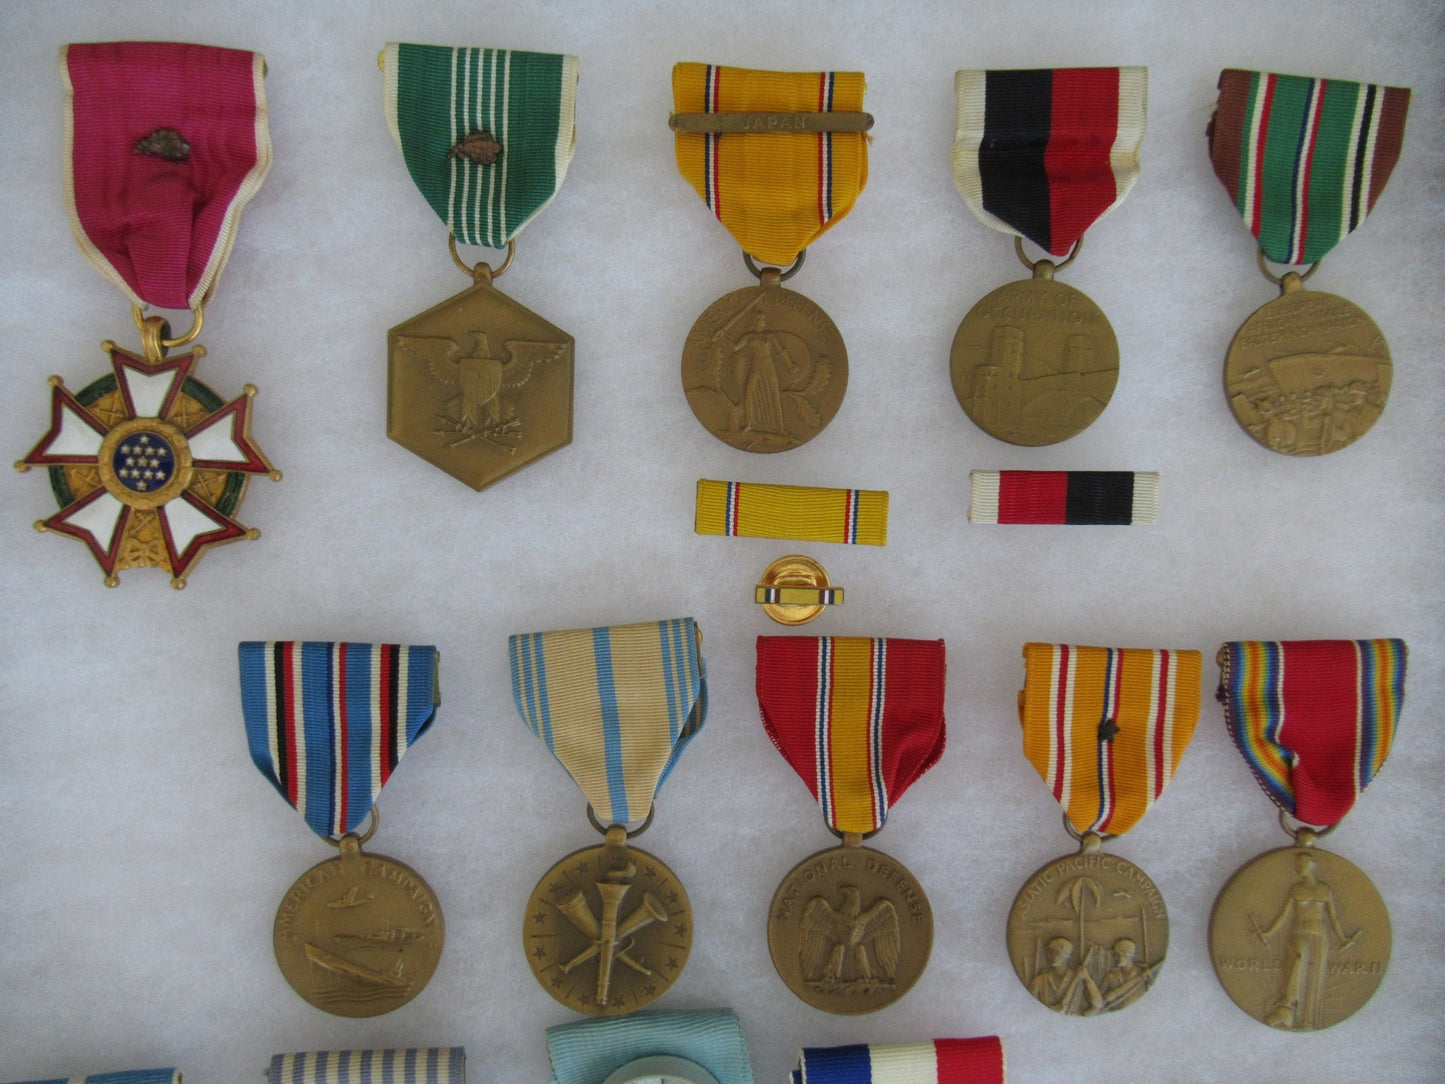 USA GROUP OF MEDALS DOCUMENTS BELONGING TO COL. PHILIP J. GALANTI.